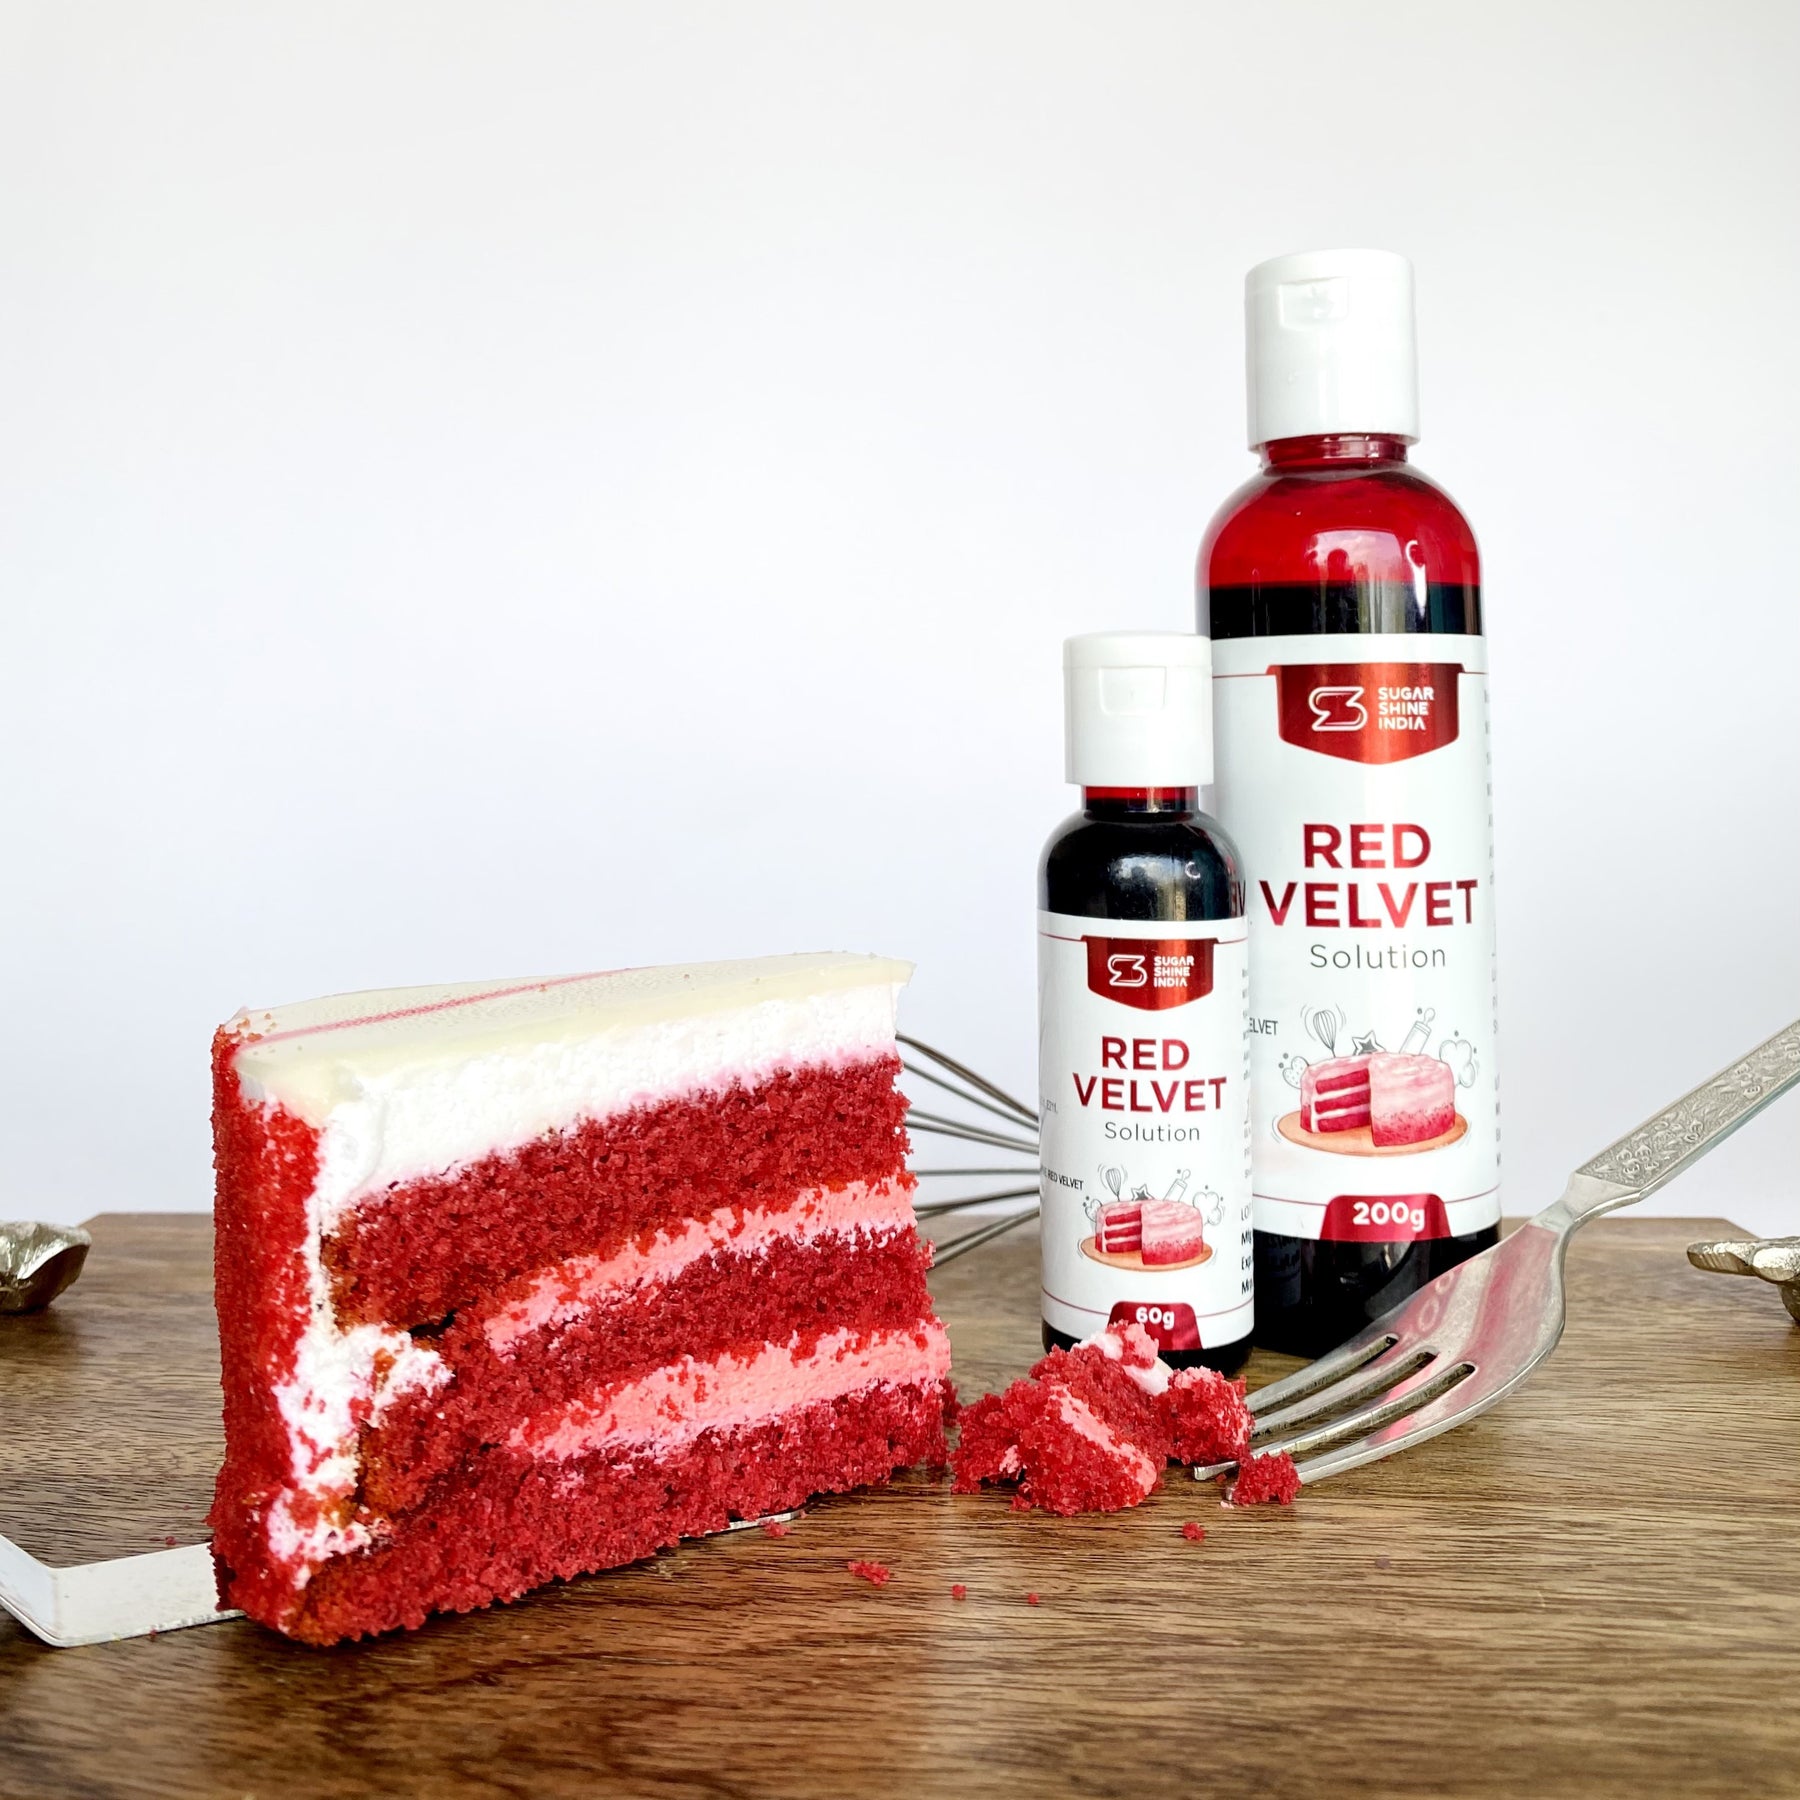 Sunny Agencies - *Sugar Shine Red Velvet Solution* is a premium formulated  emulsion for Red Velvet Cakes. It gives the beautiful vibrant red colour to  your red velvet cakes along with a